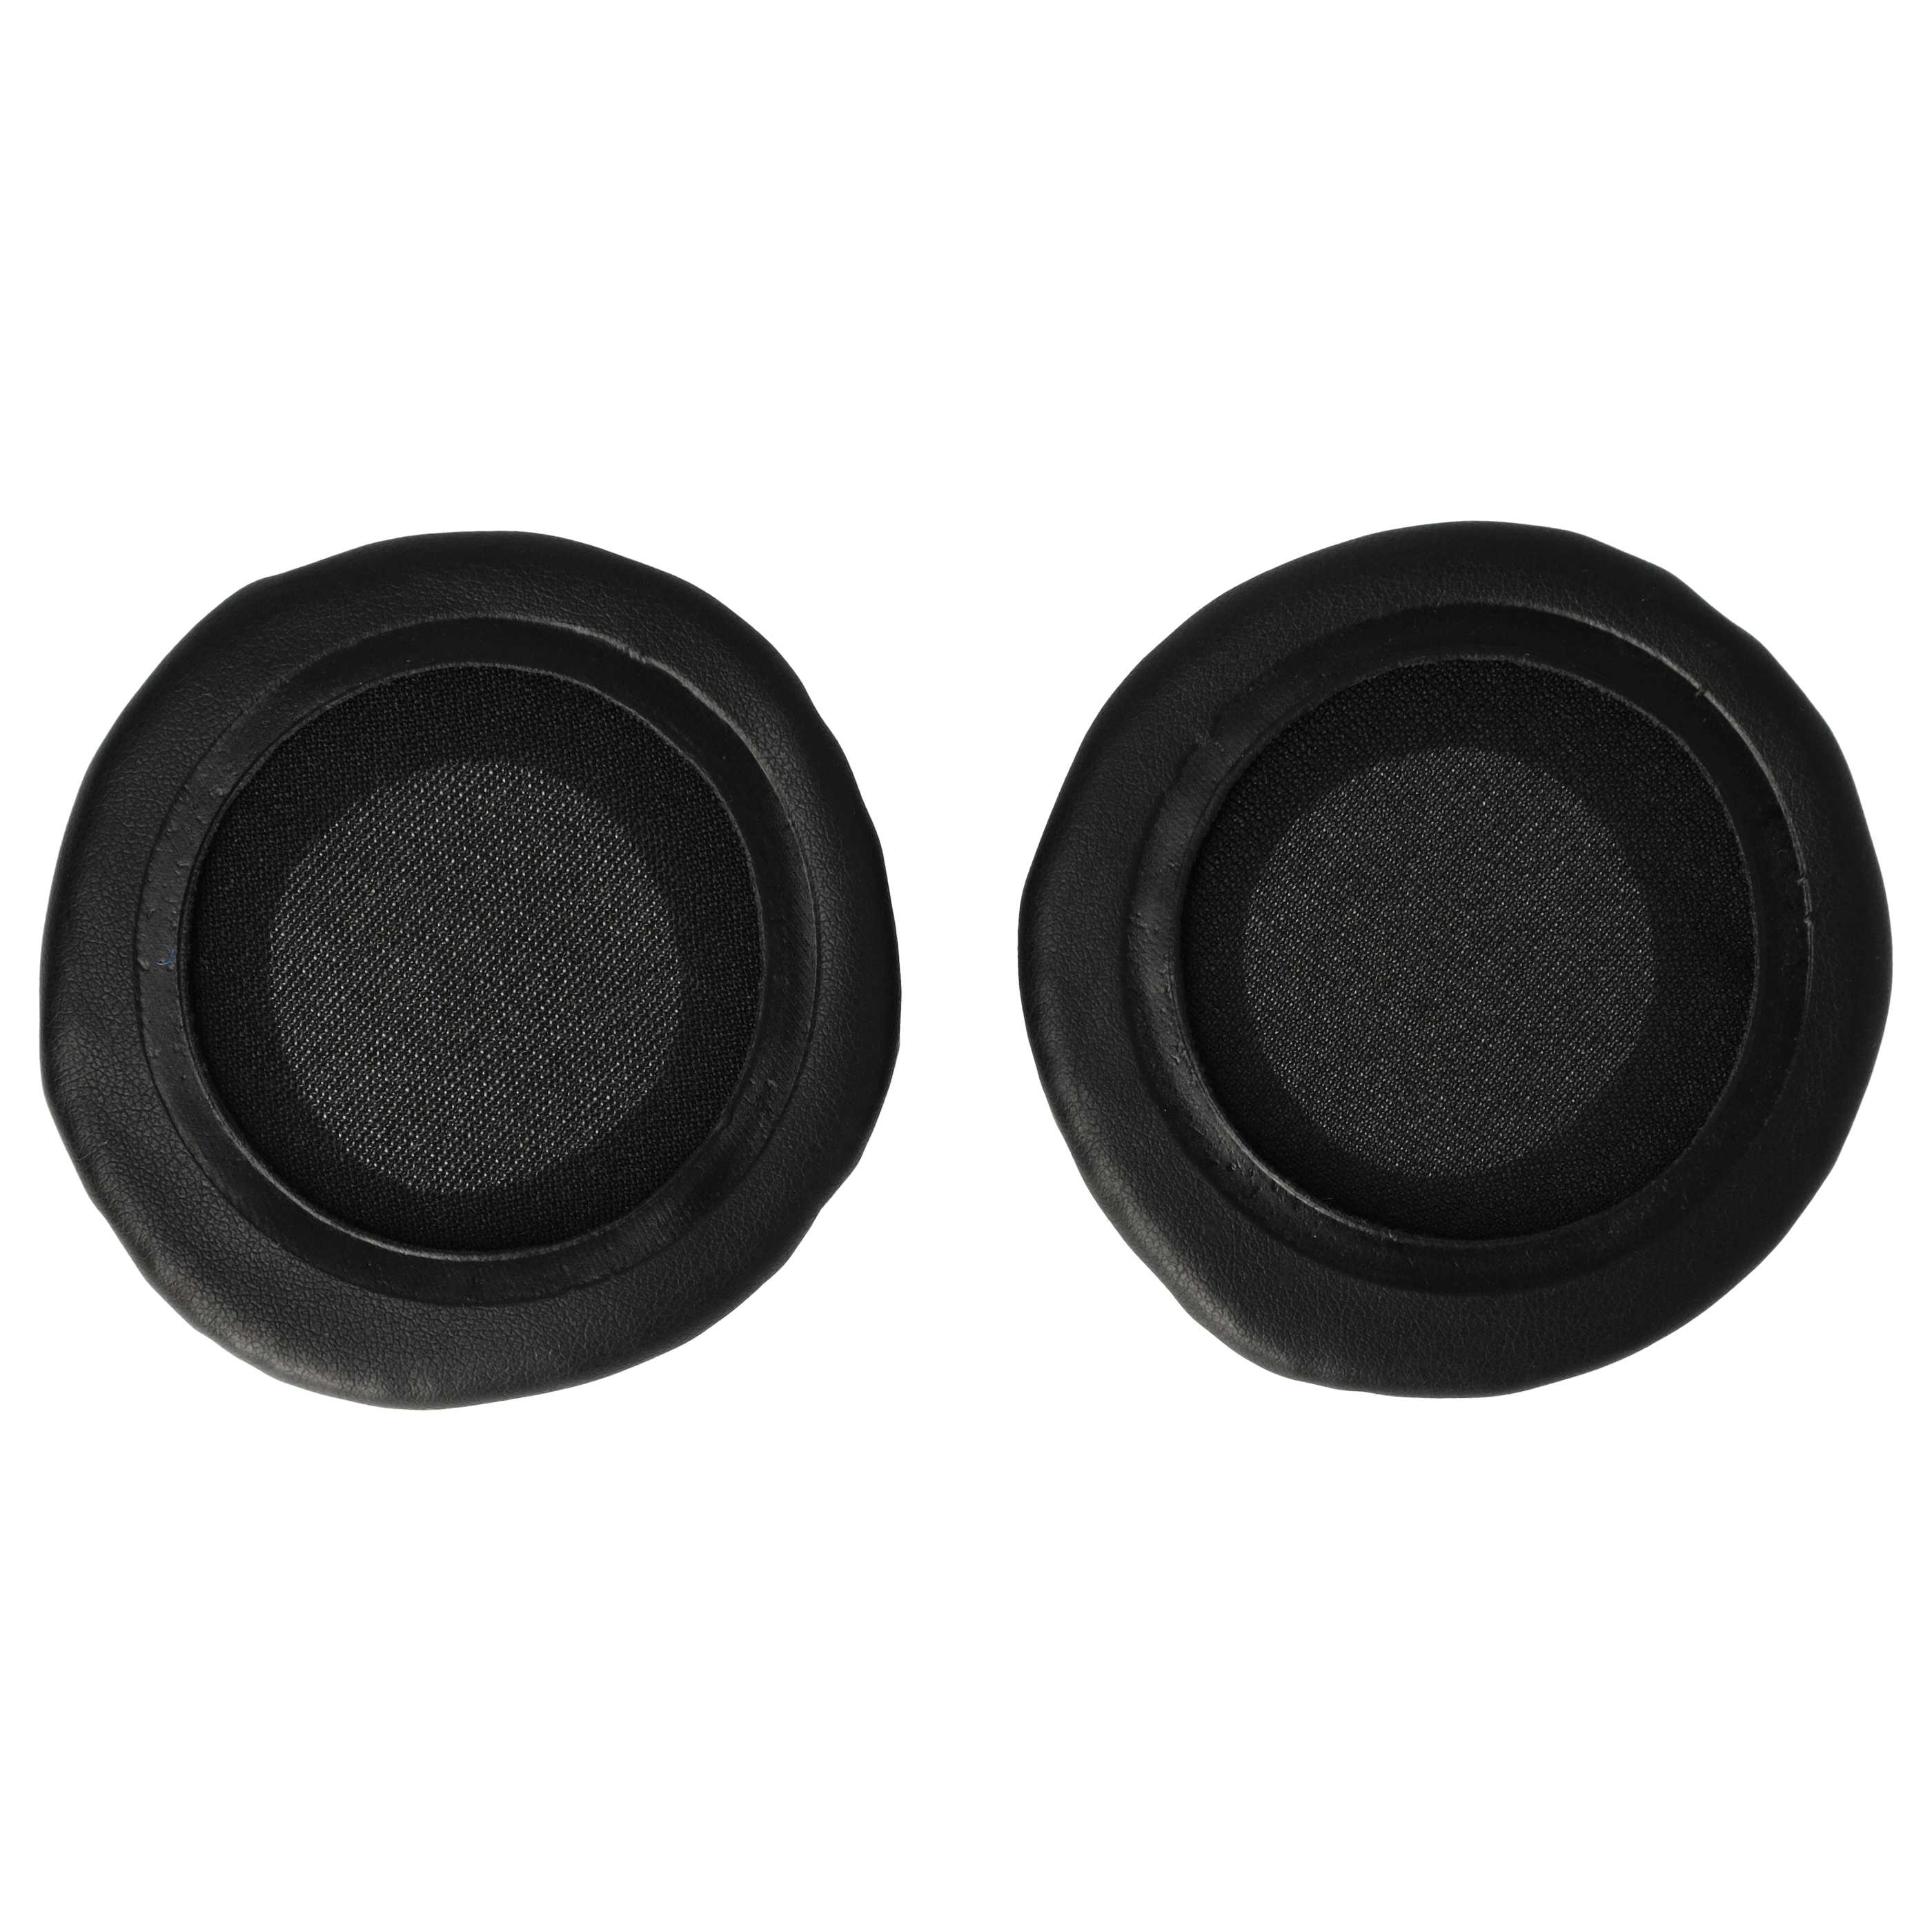 2x Ear Pads suitable for headphones which require 65mm ear pads / t.Bone HD 660 Headphones etc. - polyurethane